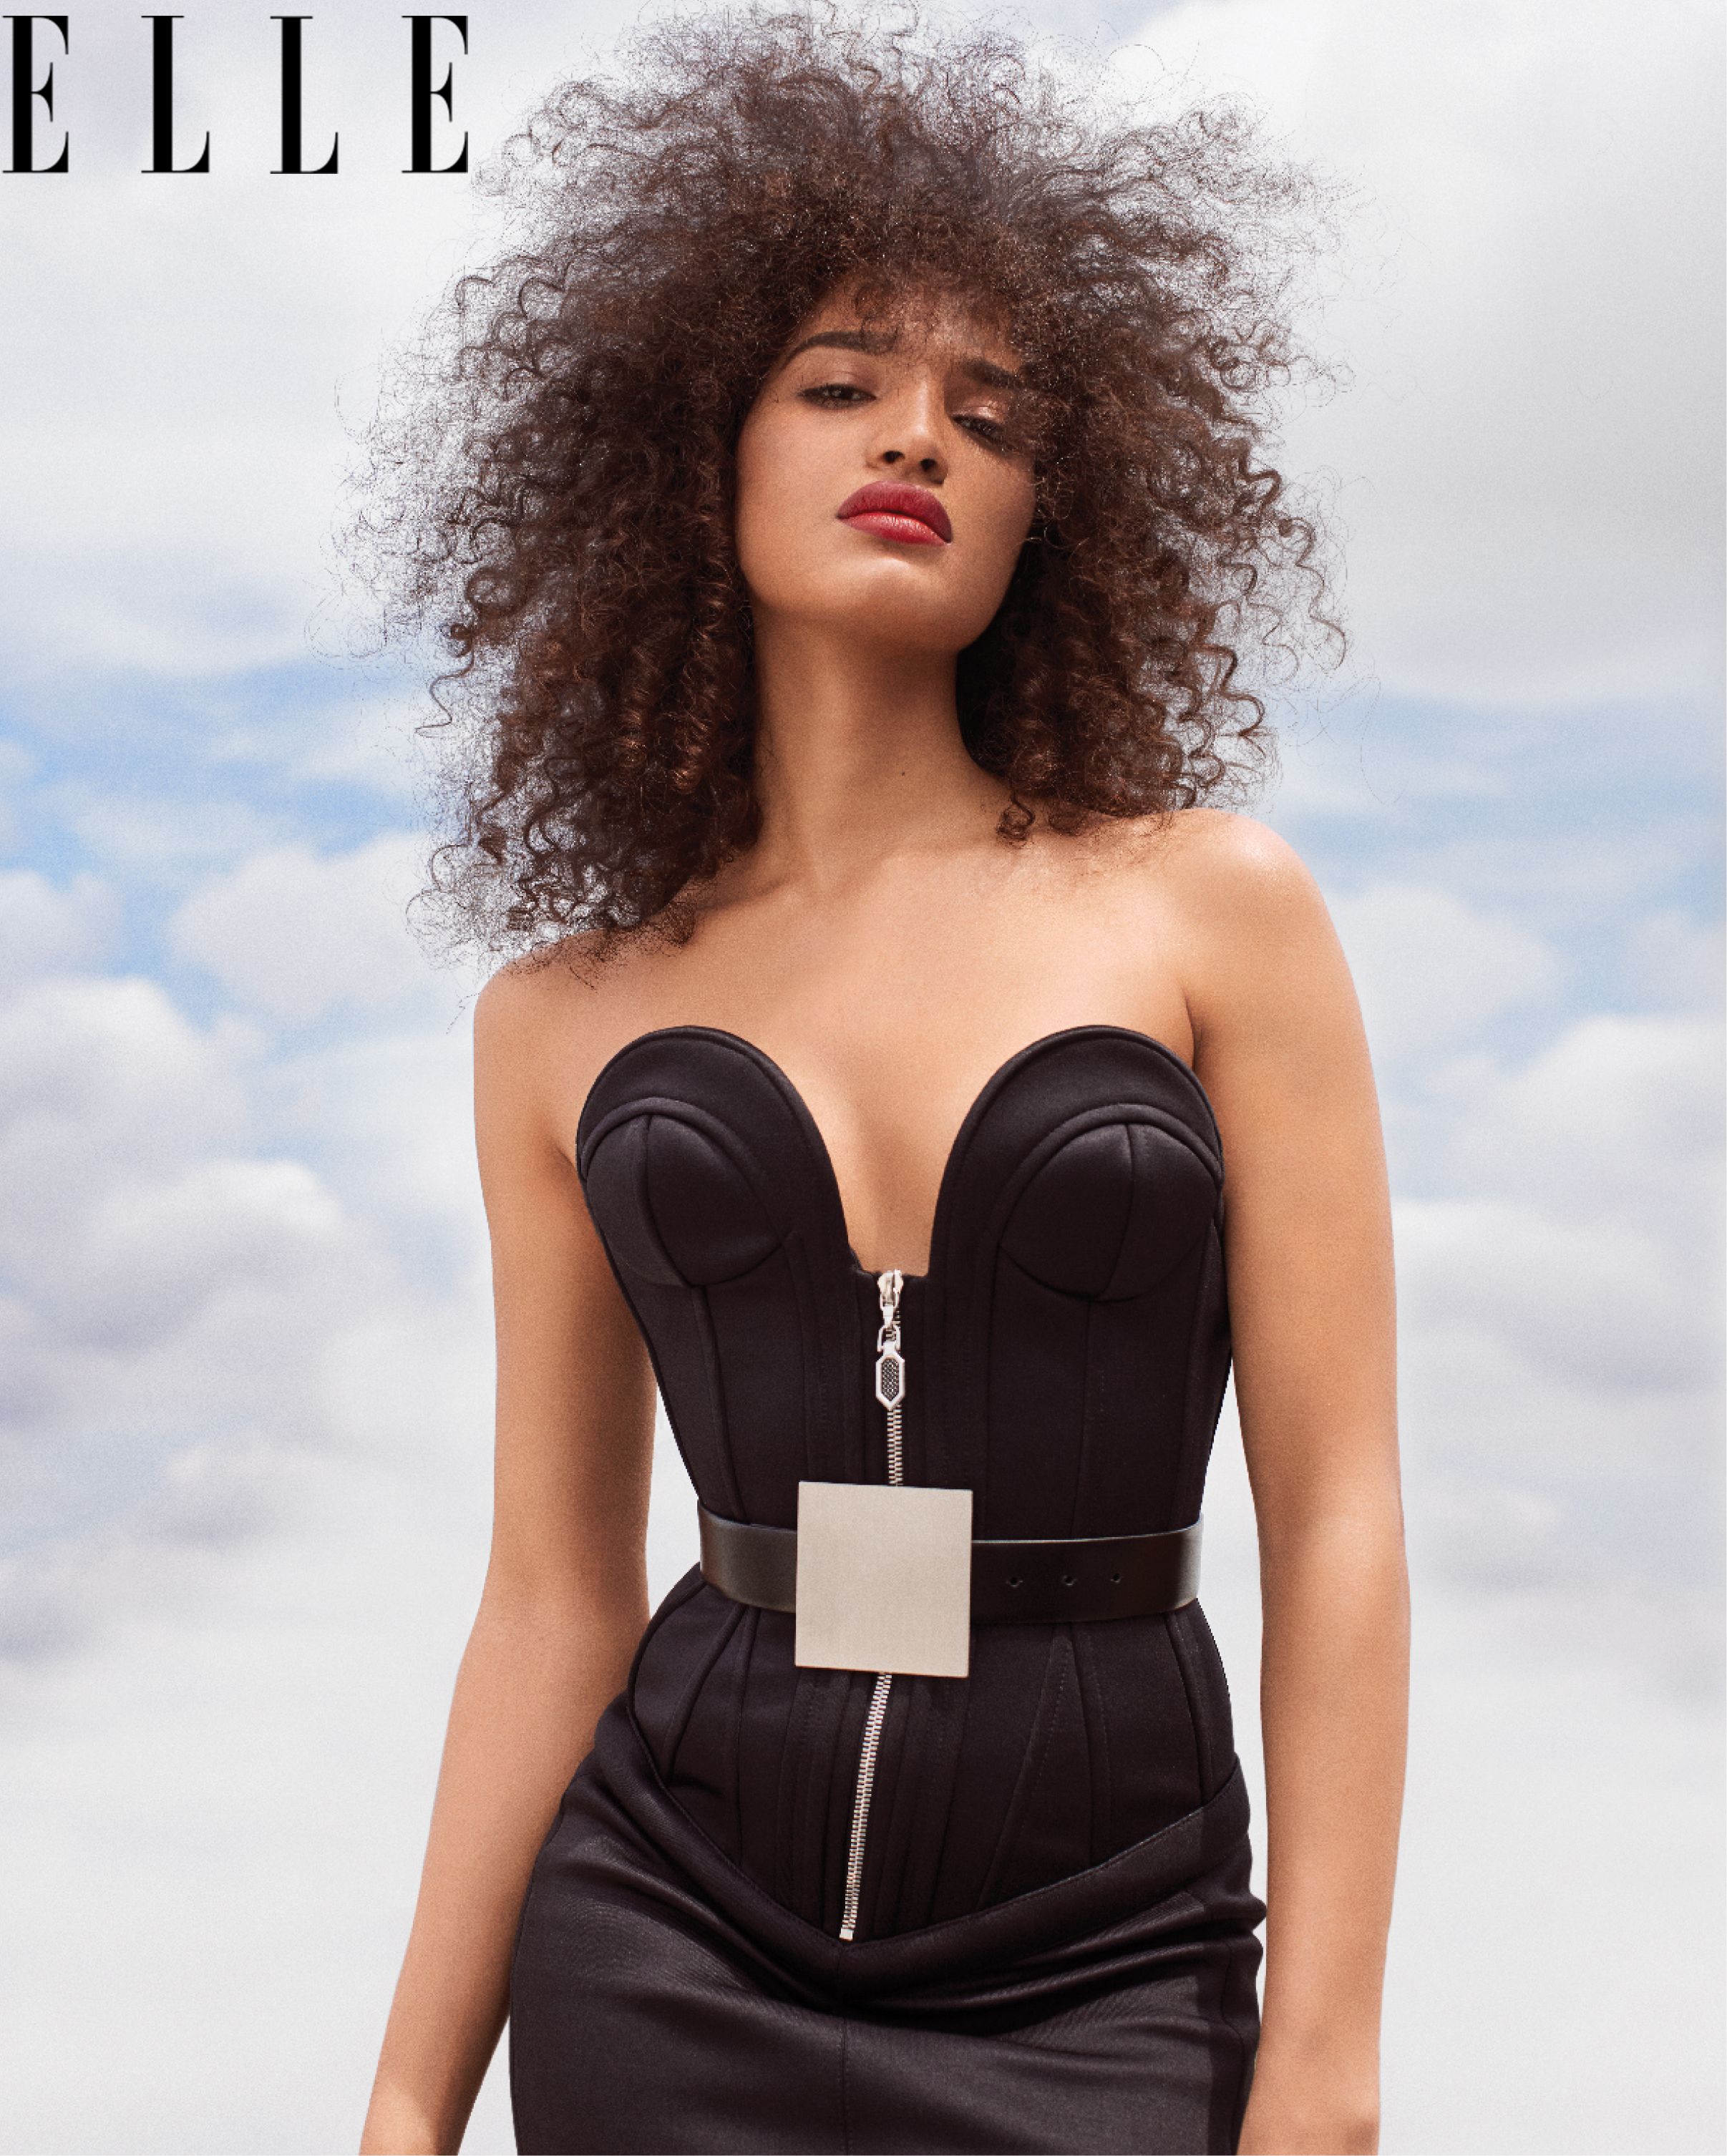 Indya Moore Talks Pose TV Show and Her Journey From Homelessness to Transgender Activist pic photo pic